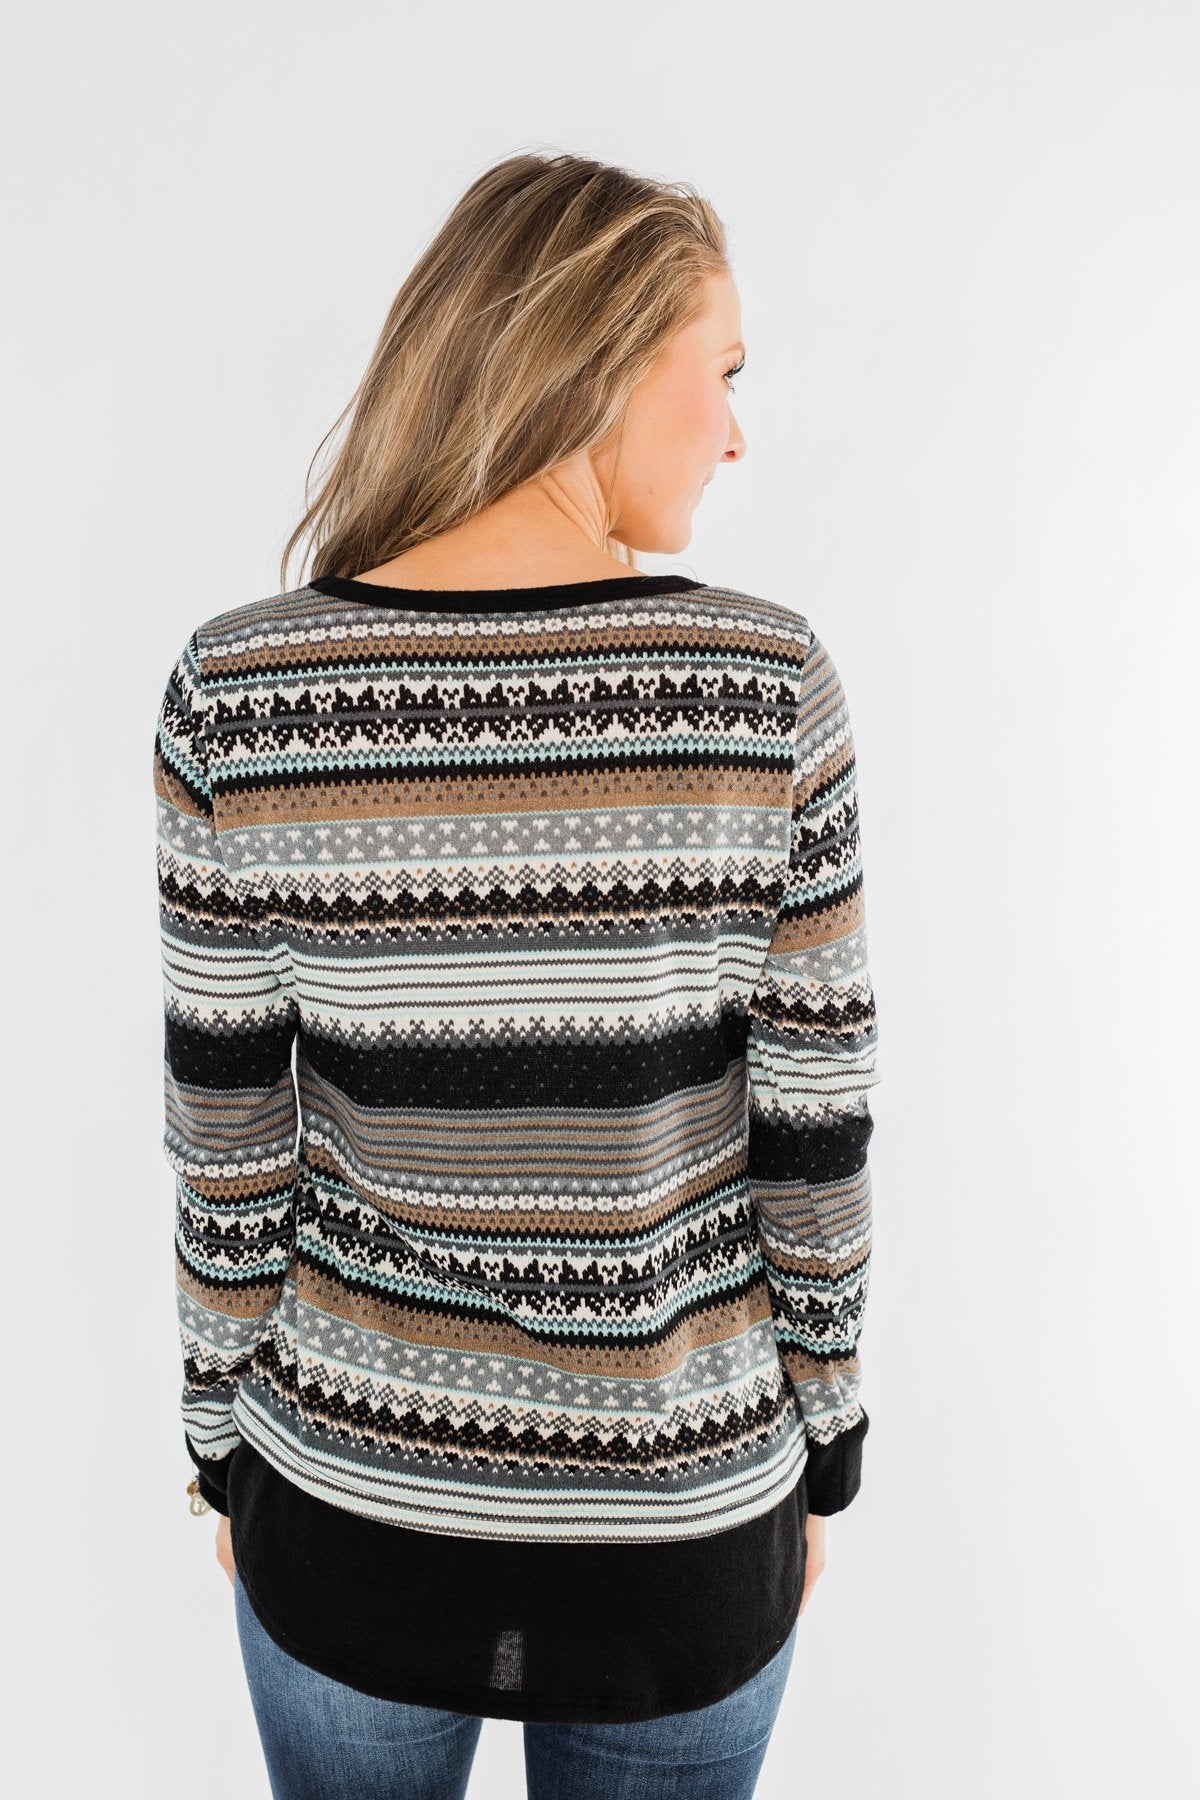 Simply Beautiful Pullover Top- Black & Mint